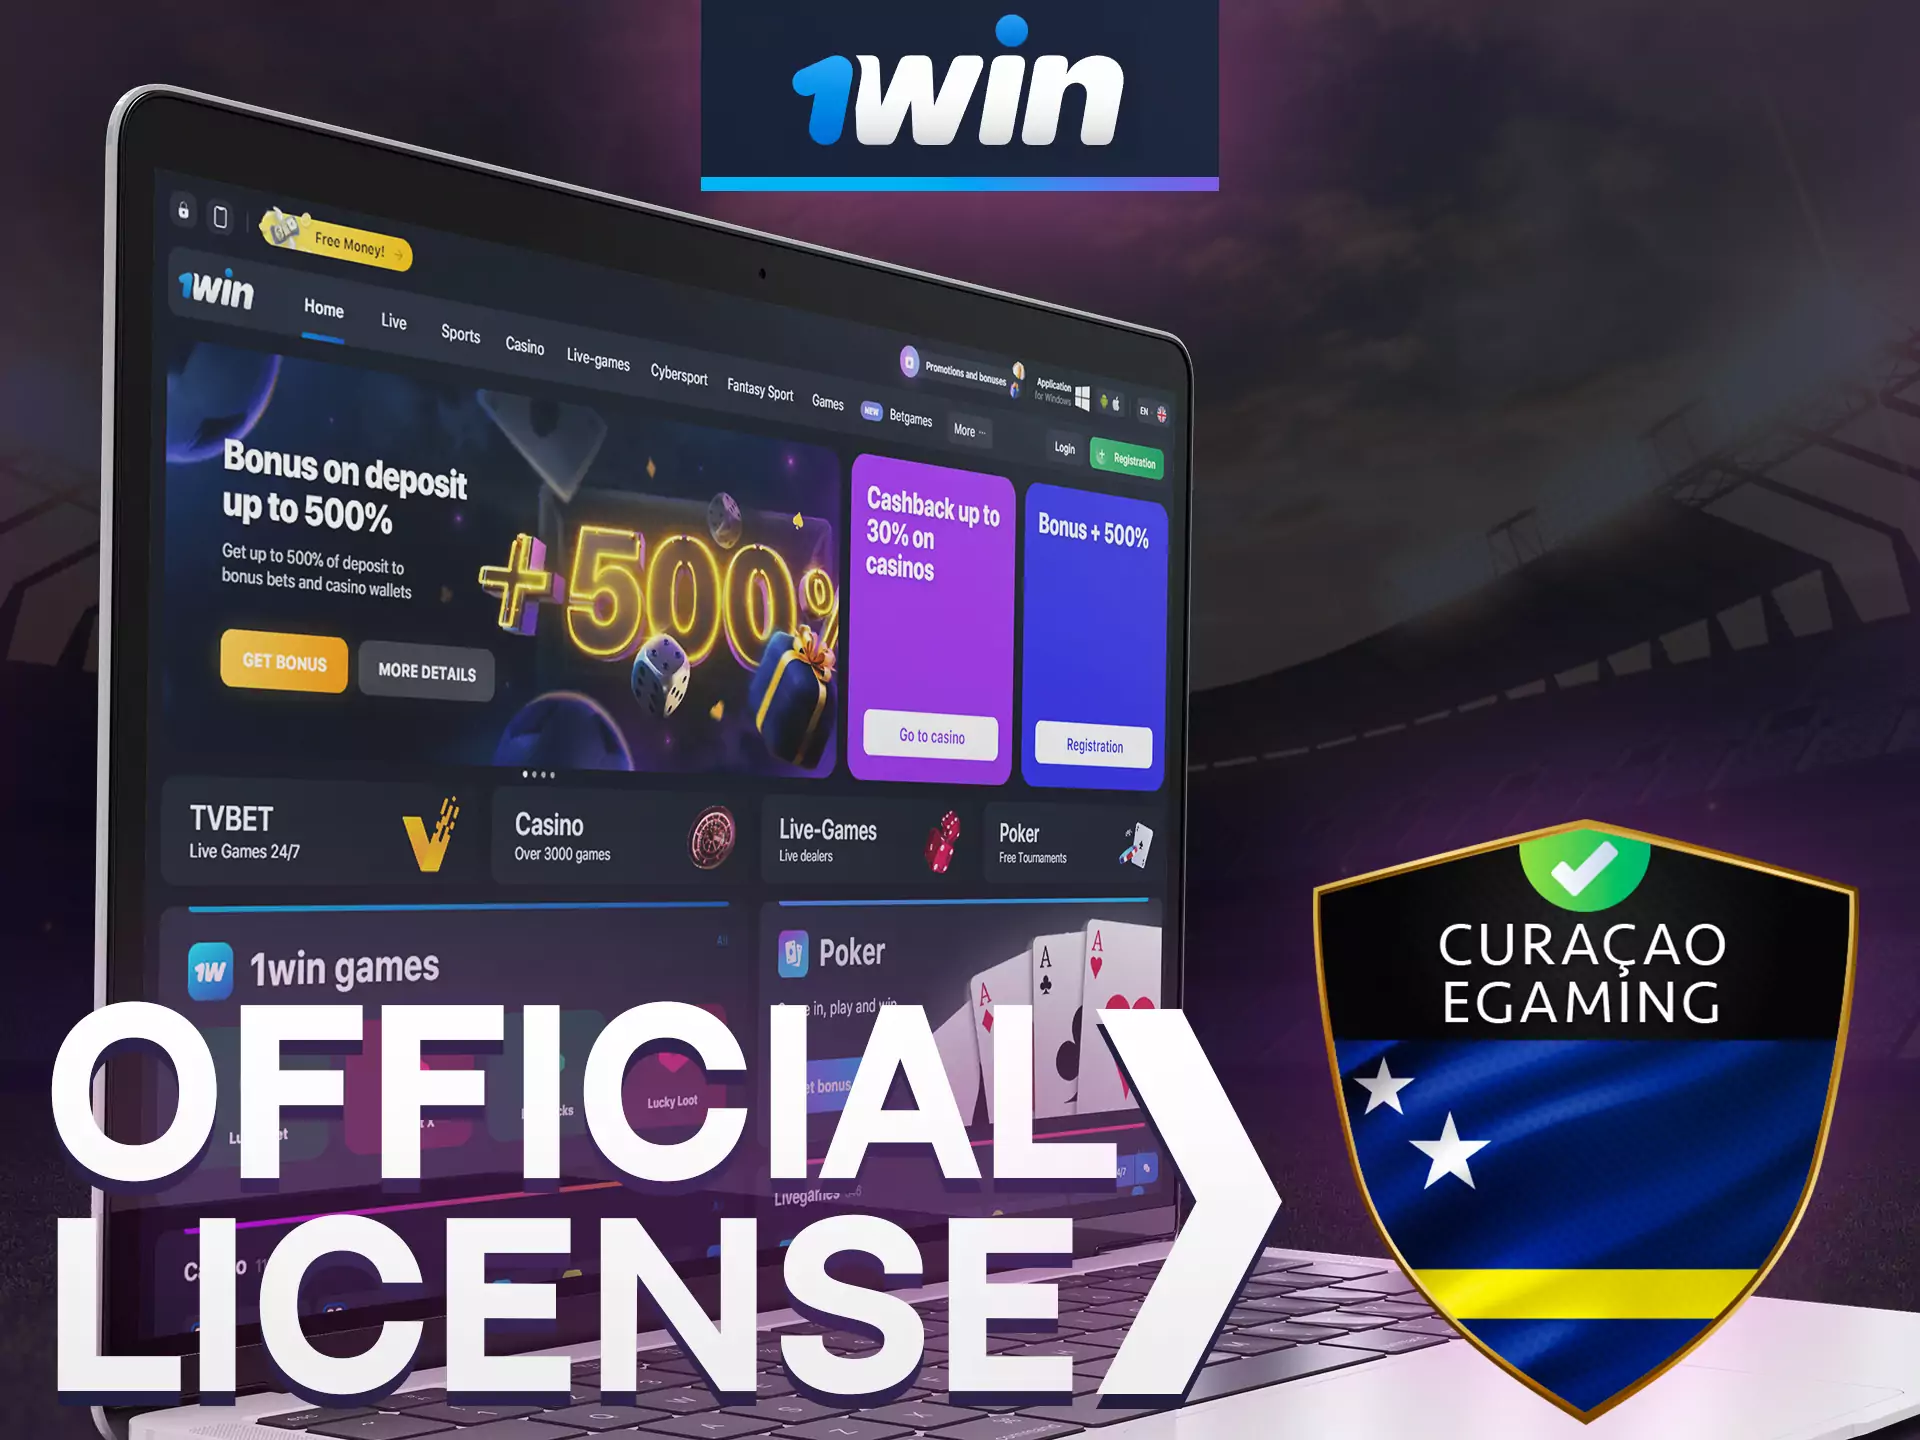 1win betting company supports all of the licenses.